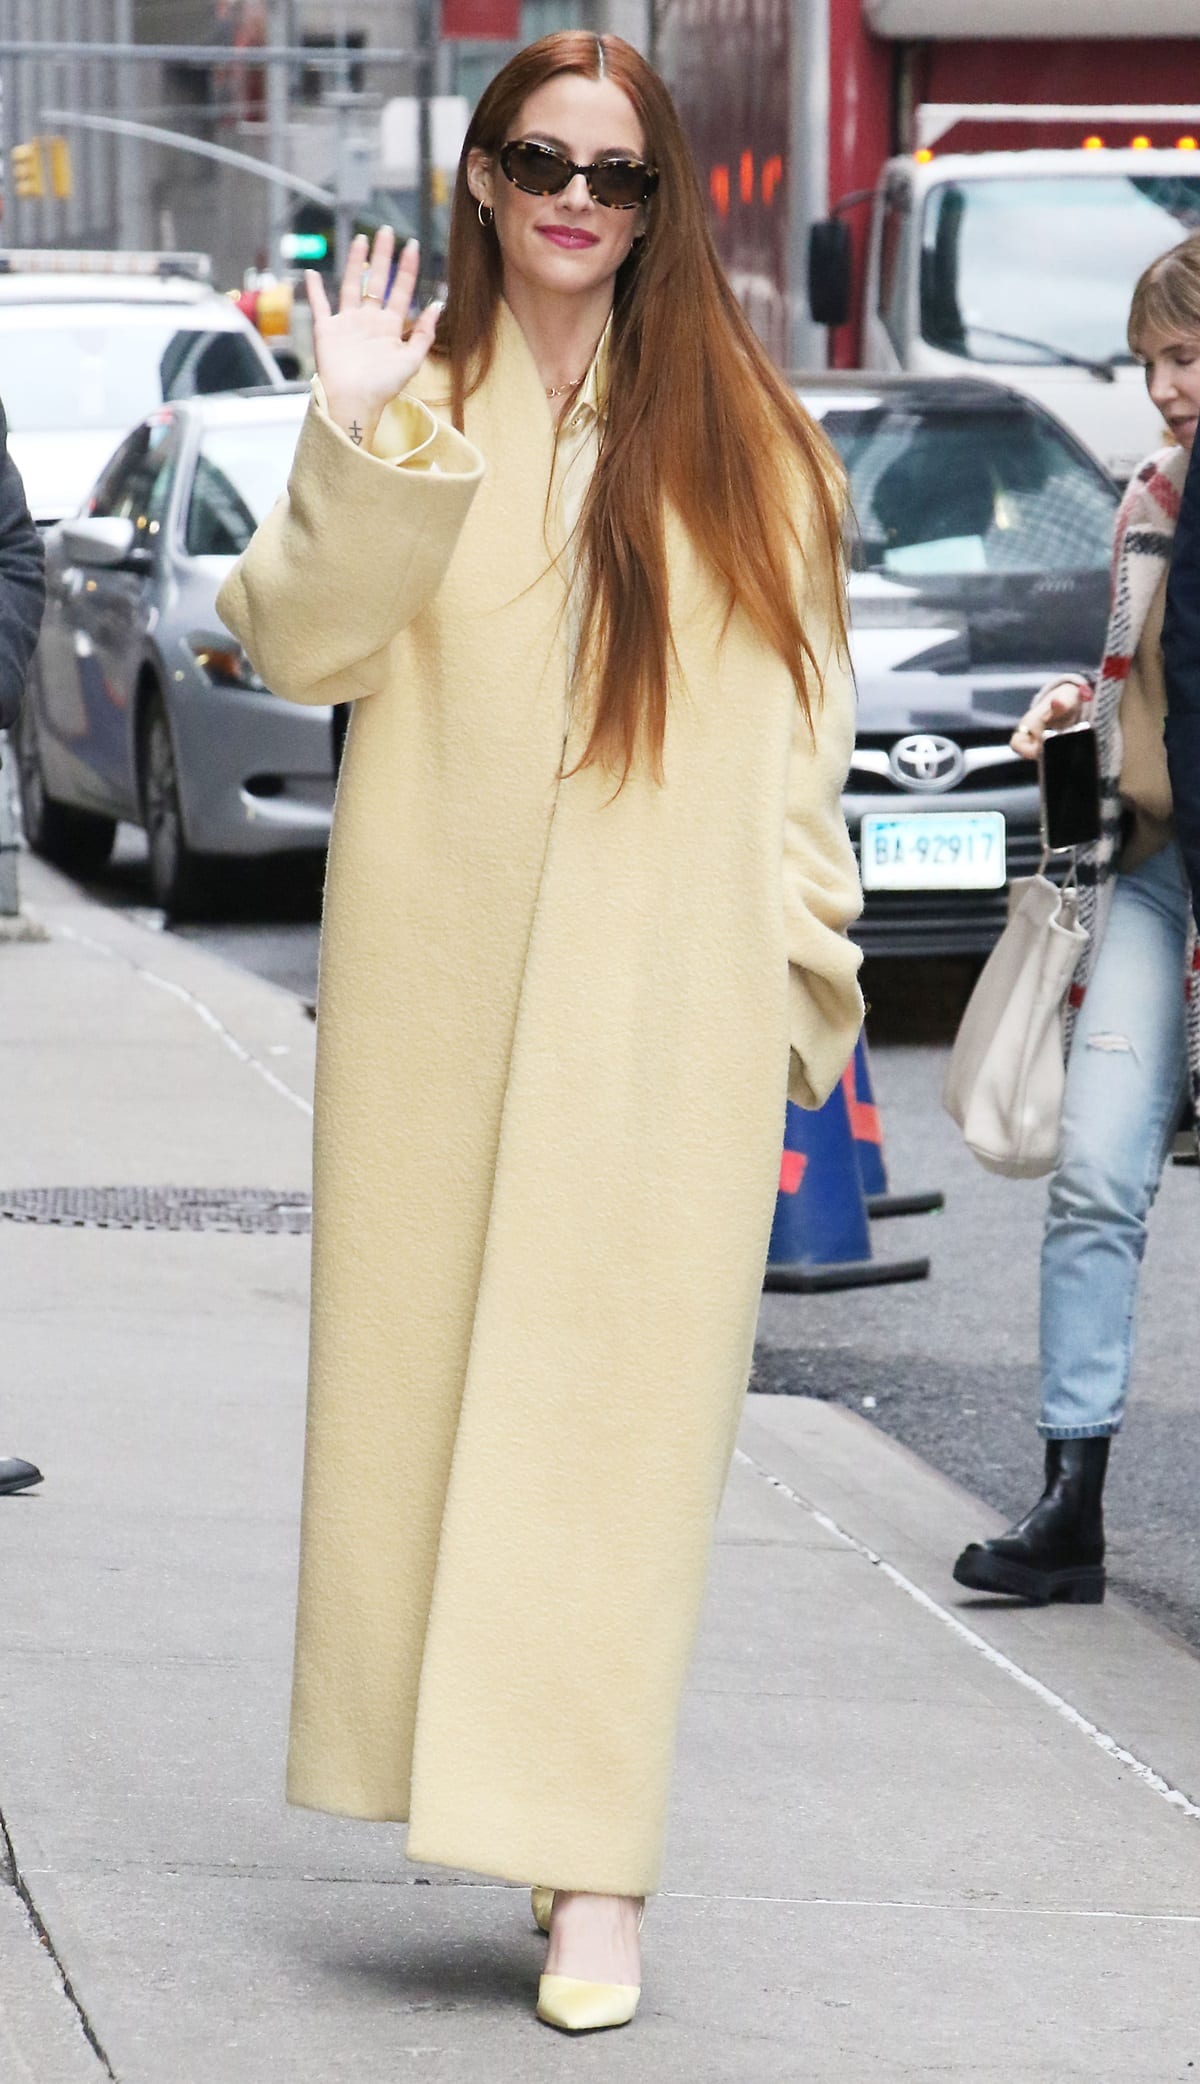 Riley Keough arrives for a taping of The Drew Barrymore Show in a yellow The Row Ceren brushed alpaca-blend coat paired with Khaite x Oliver Peoples 1969C sunglasses and Charles & Keith Sepatu pumps